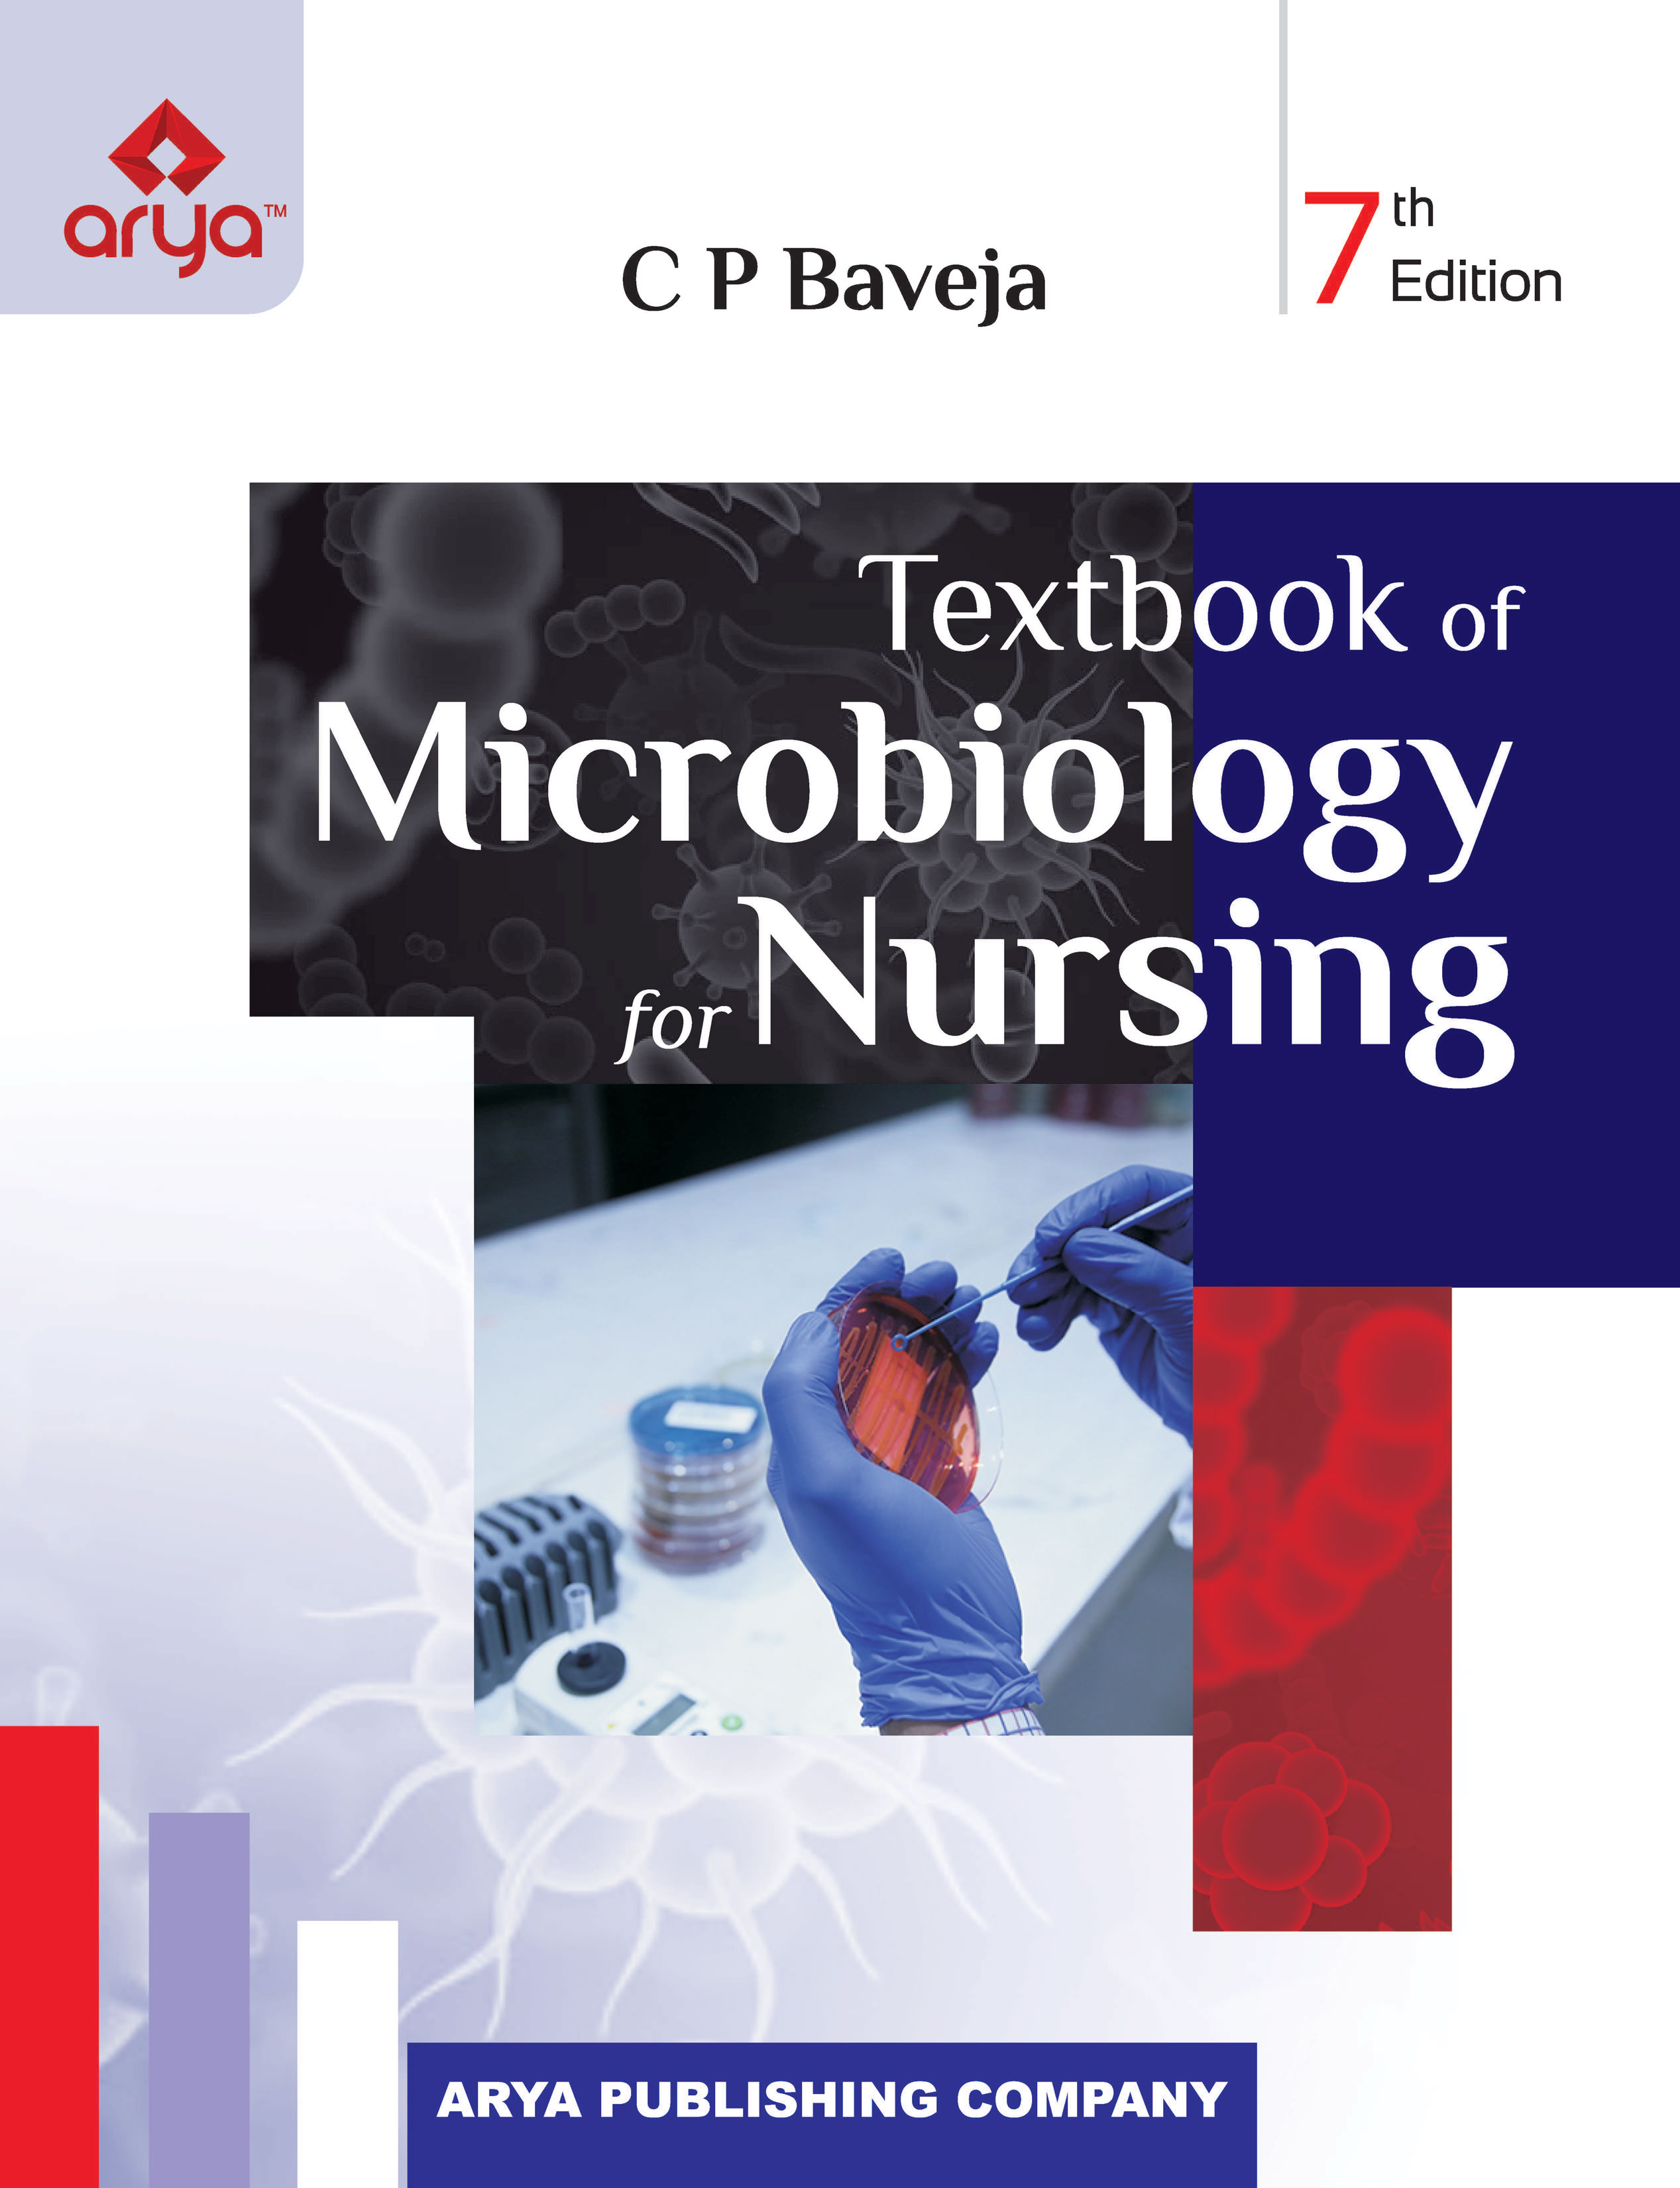 Textbook of Microbiology for Nursing 